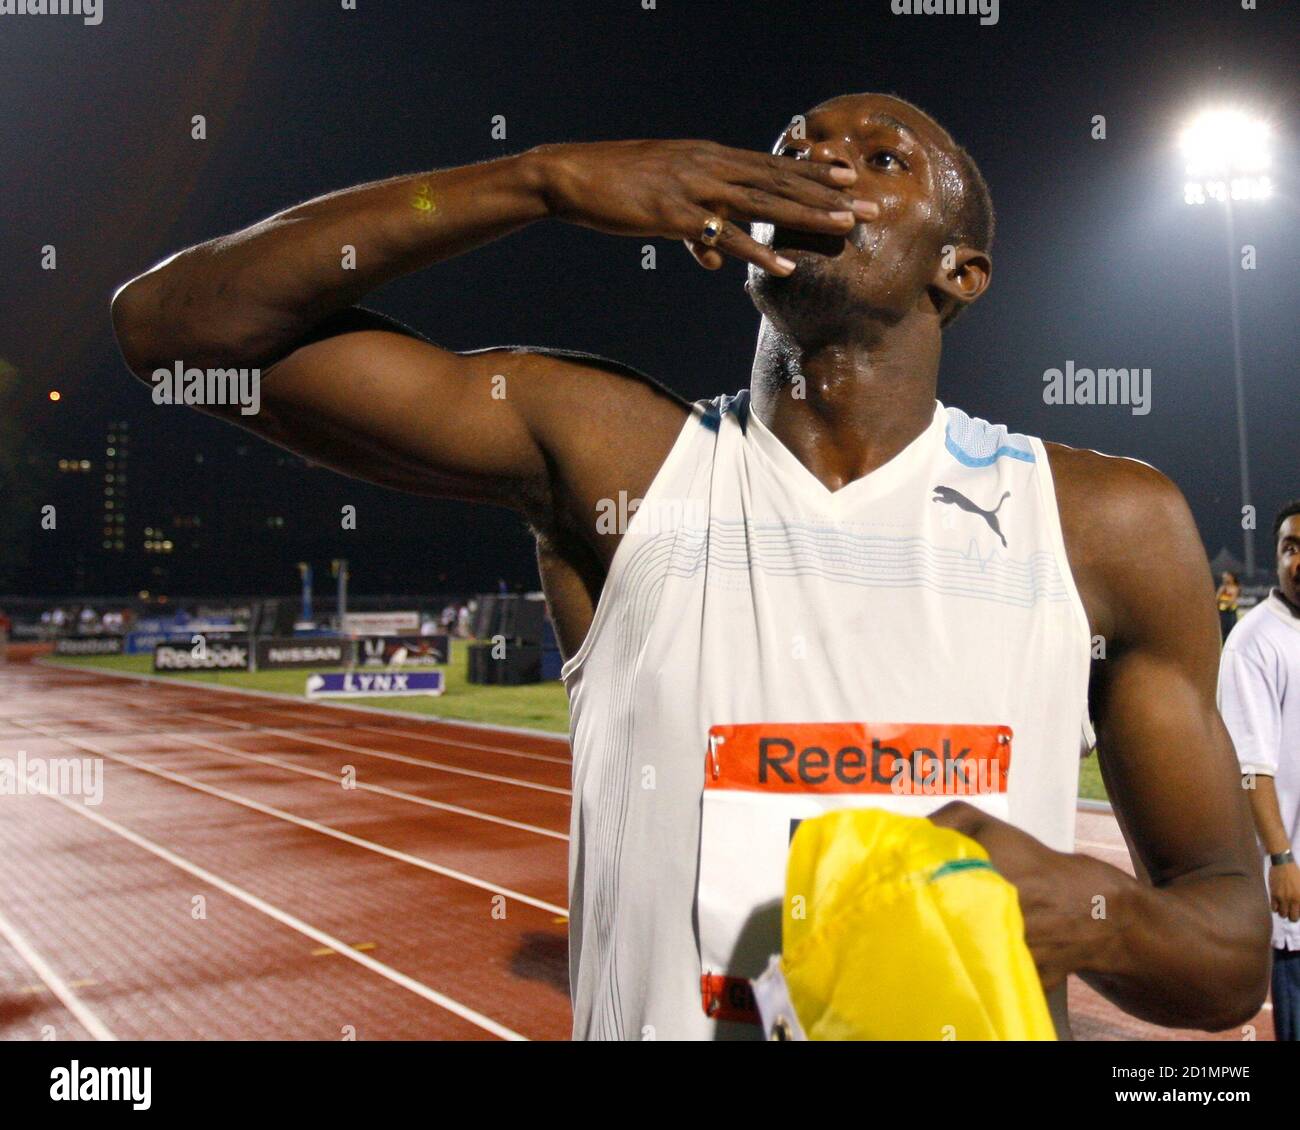 Usain Bolt of Jamaica blows a kiss to the crowd as he celebrates setting a  new world record in the men's 100 meters race at the Reebok Grand Prix  athletics meet in